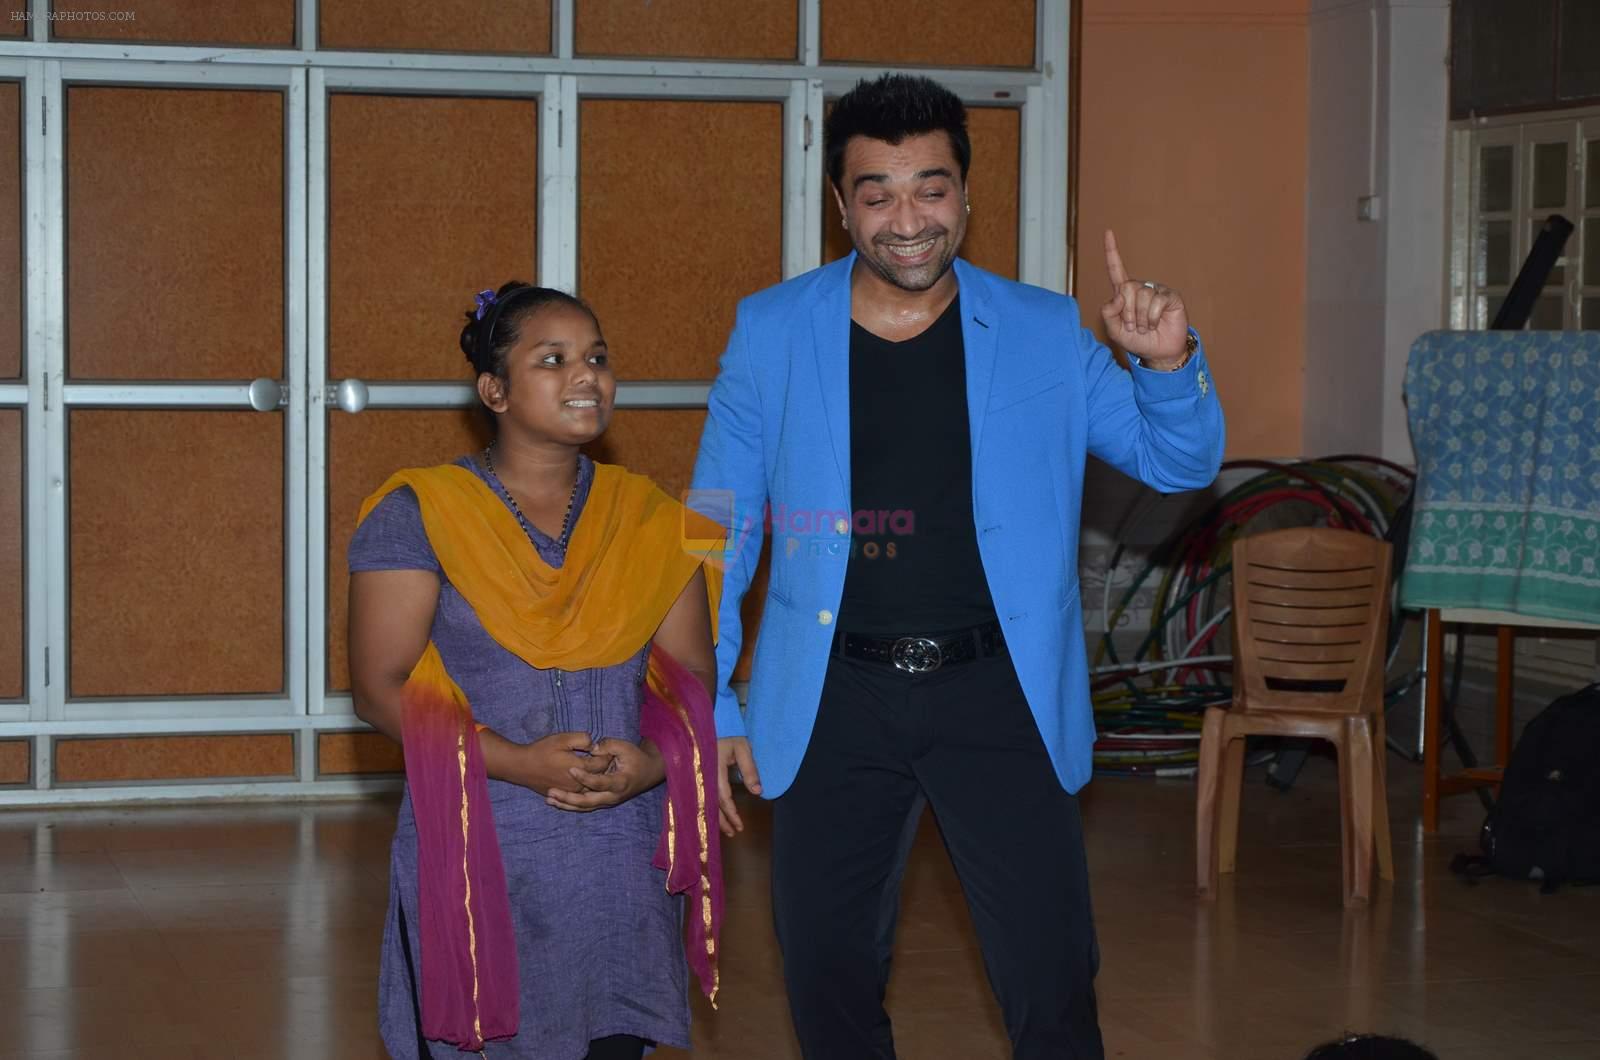 Ajaz Khan spends time with kids in Mumbai on 29th May 2015